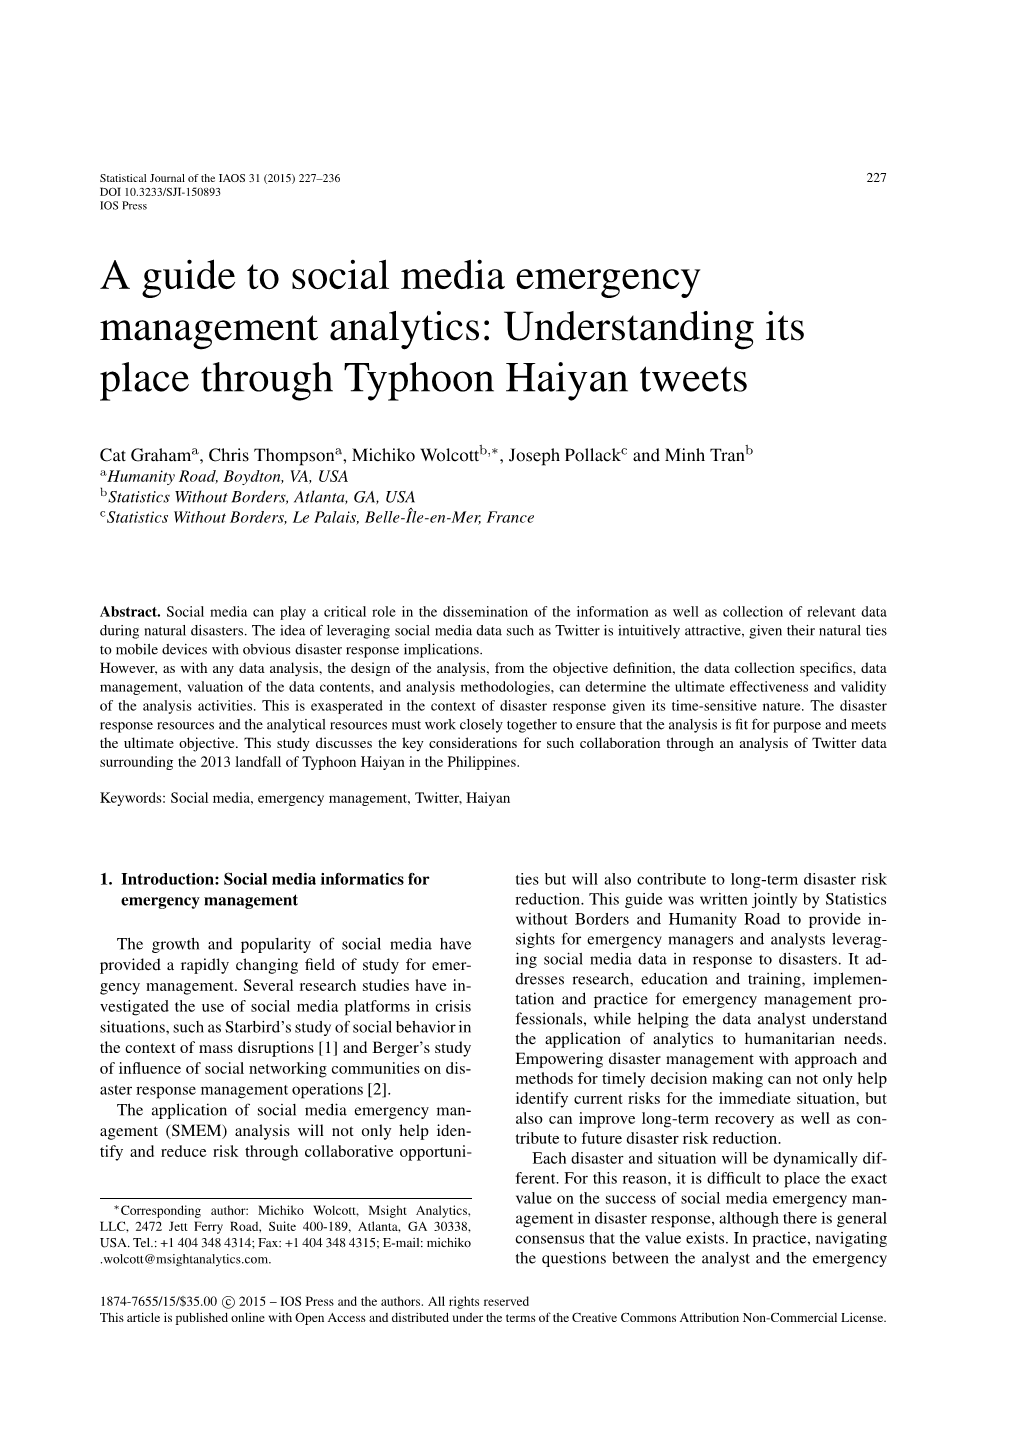 A Guide to Social Media Emergency Management Analytics: Understanding Its Place Through Typhoon Haiyan Tweets